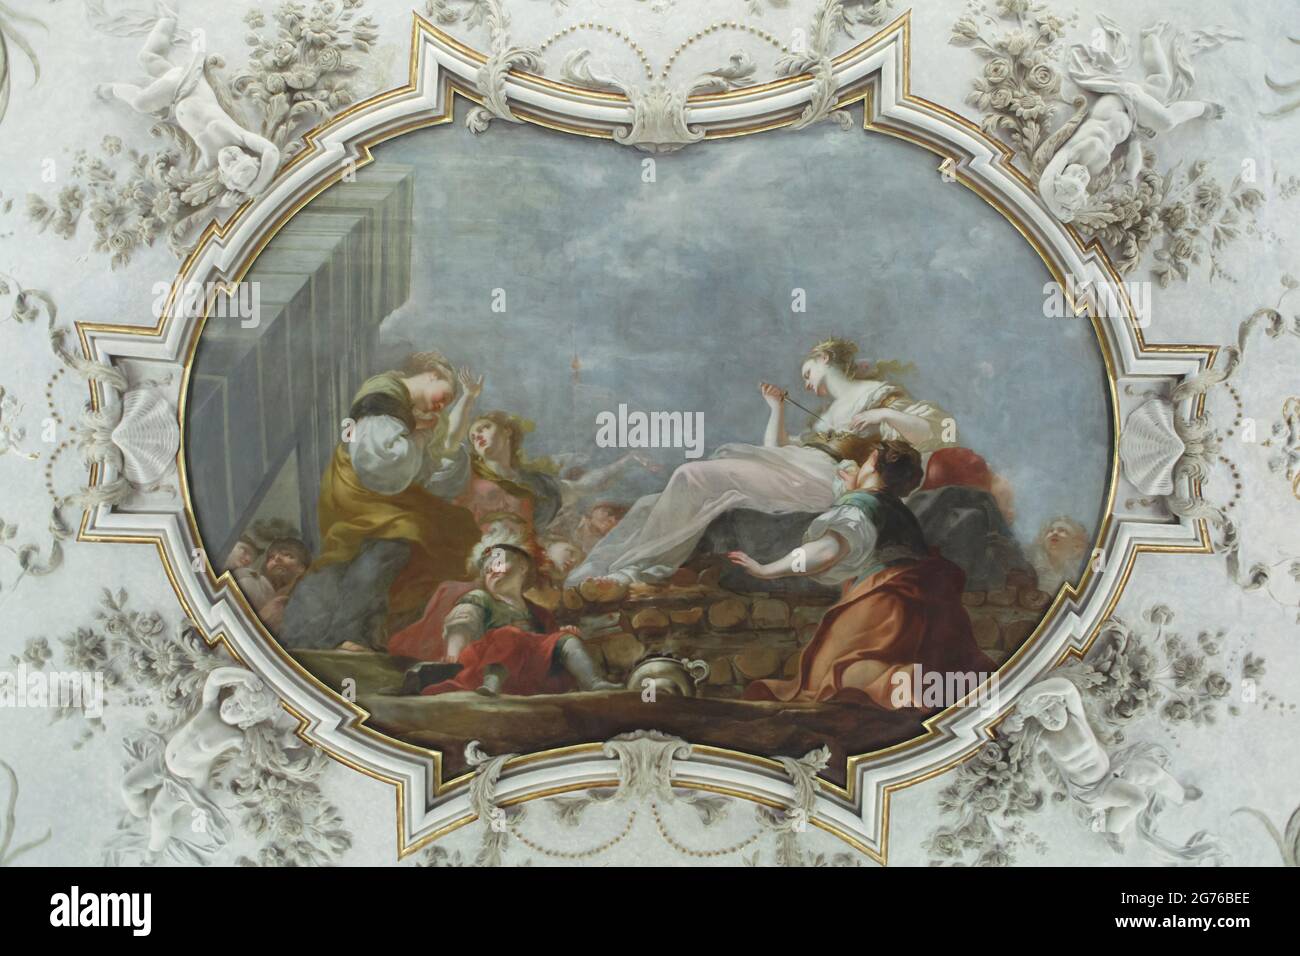 Ceiling painting 'Death of Dido' by Czech and Austrian Baroque painter Michael Václav Halbax (1661- 1711) in Sternberg Palace (Šternberský palác) in Prague, Czech Republic. Suicide of the mythical foundress of Carthage who burnt herself to death after King Iarbas of Numidia tried to force her to marry him is depicted. Sternberg Palace serves now as the permanent exhibition of old masters of the National Gallery (Národní galerie). Stock Photo